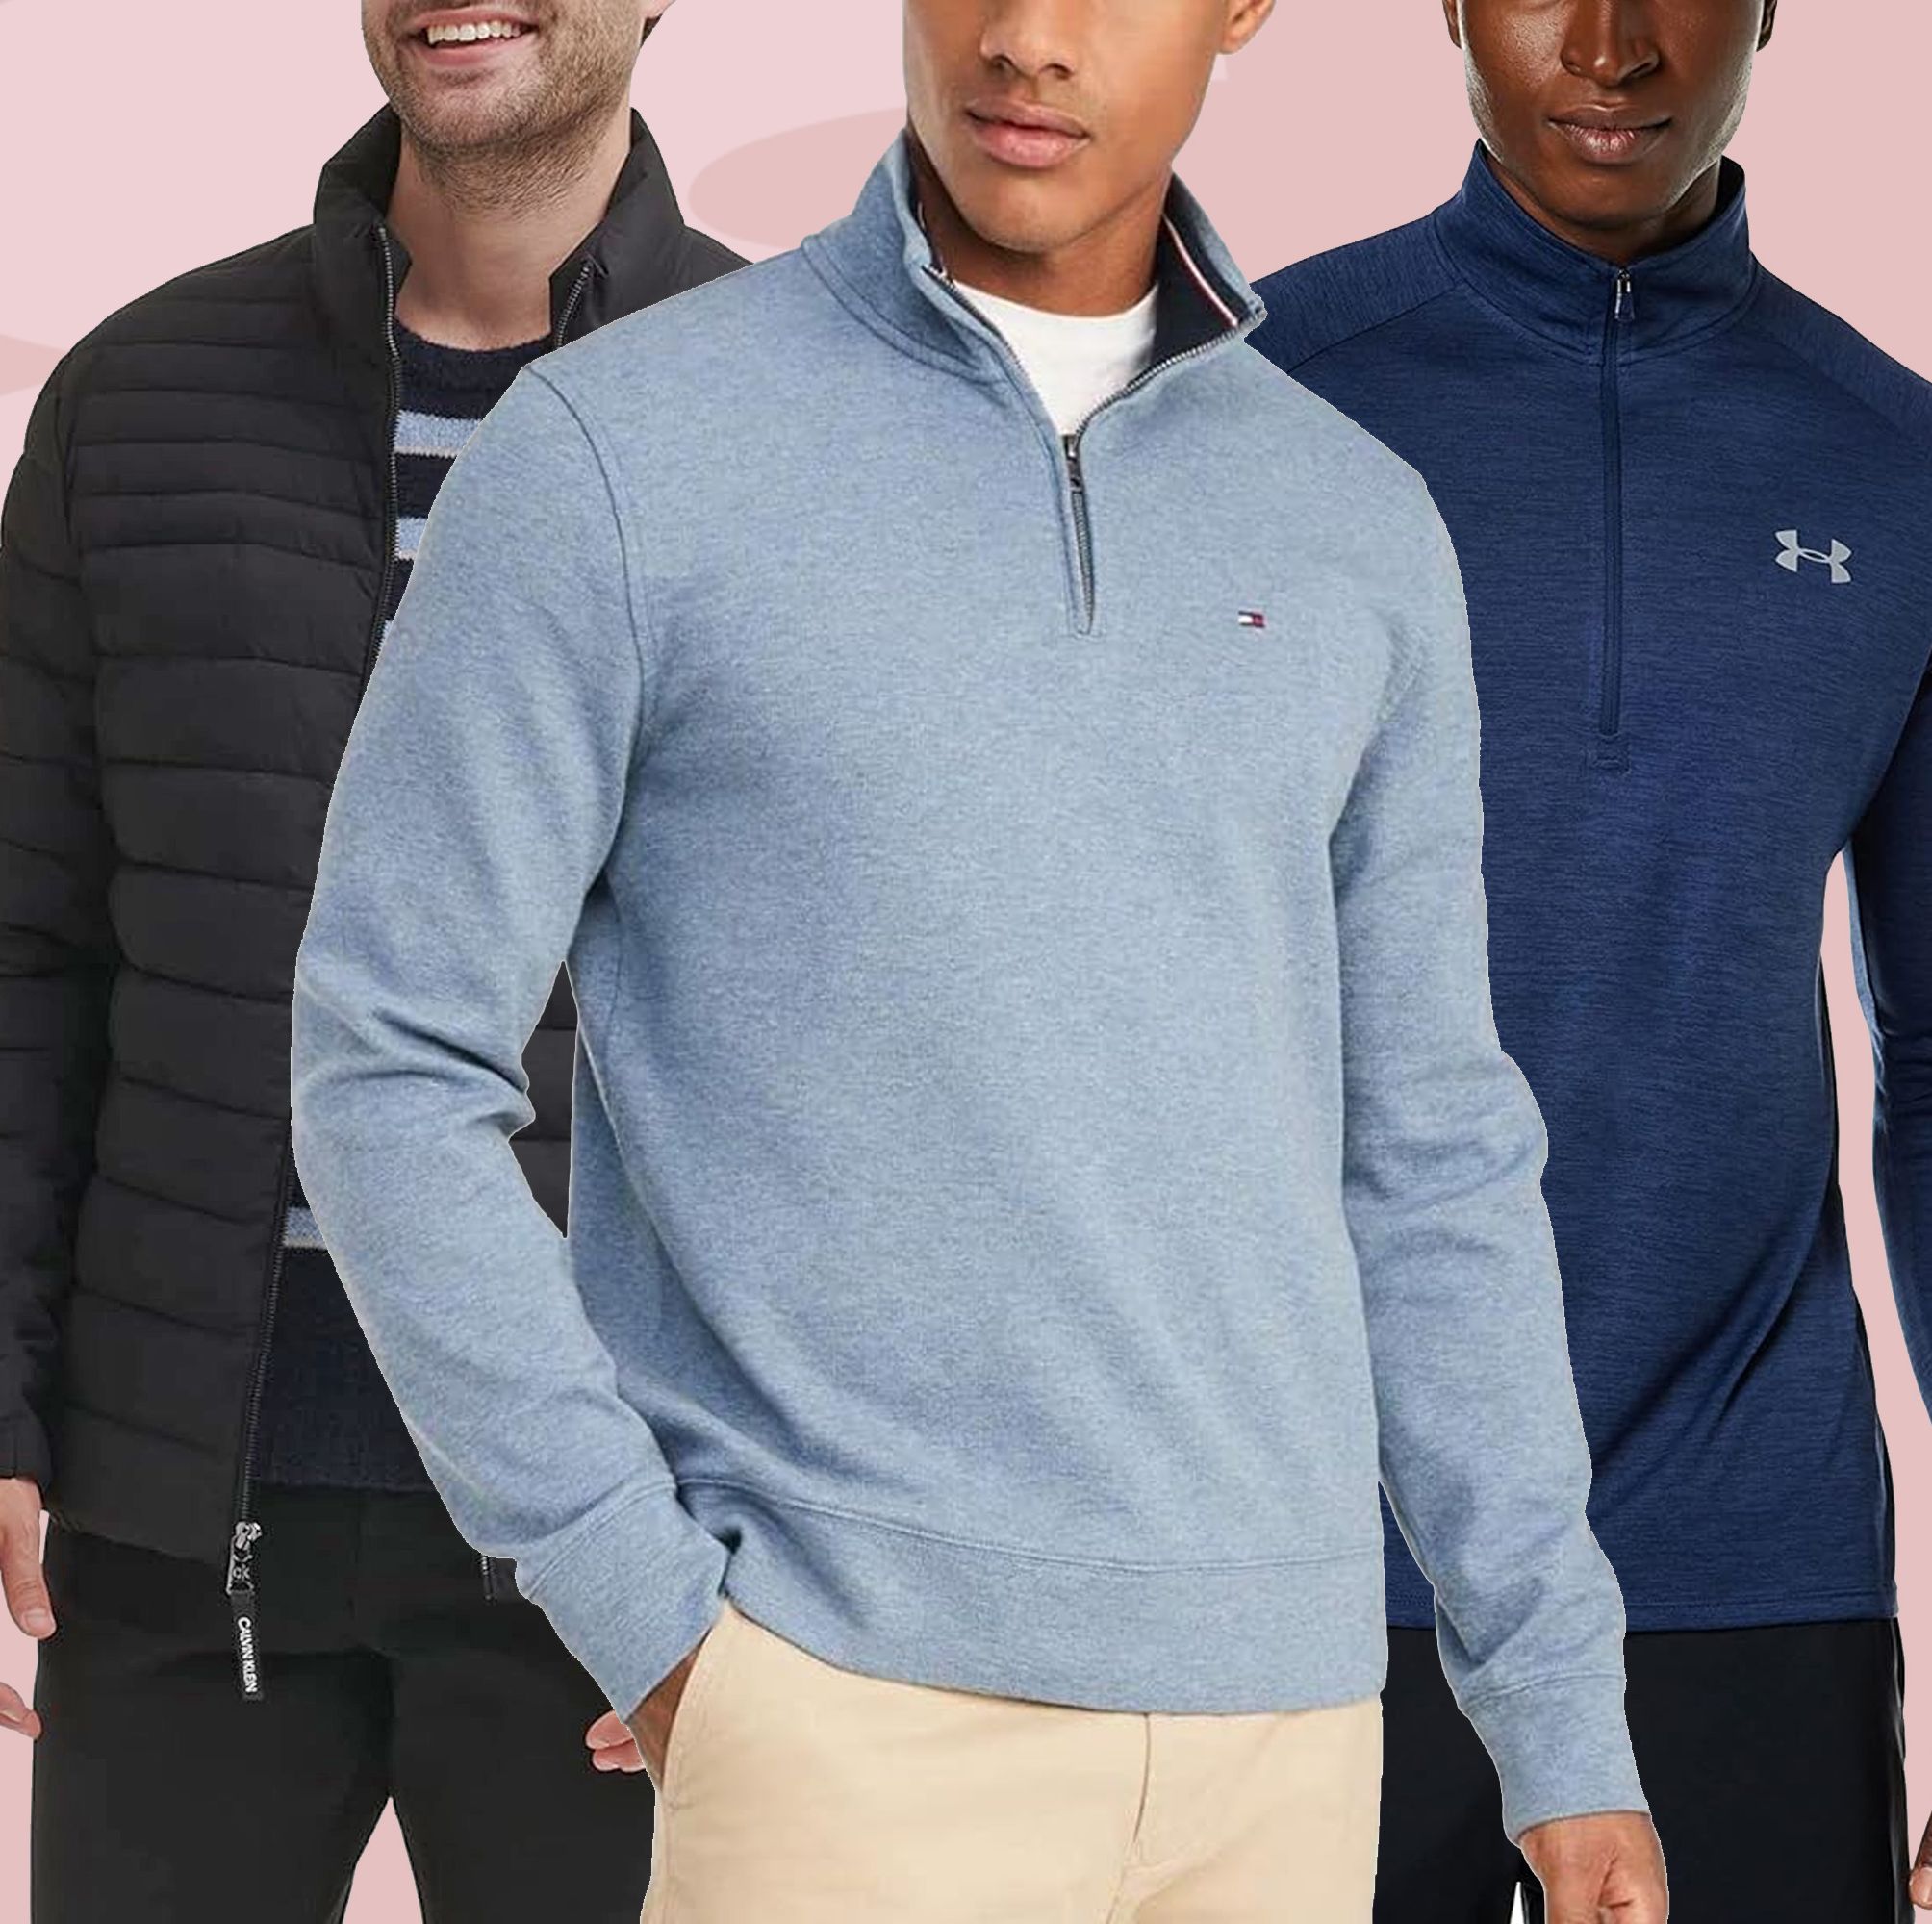 The 27 Best Amazon Prime Day Menswear Deals to Shop Now